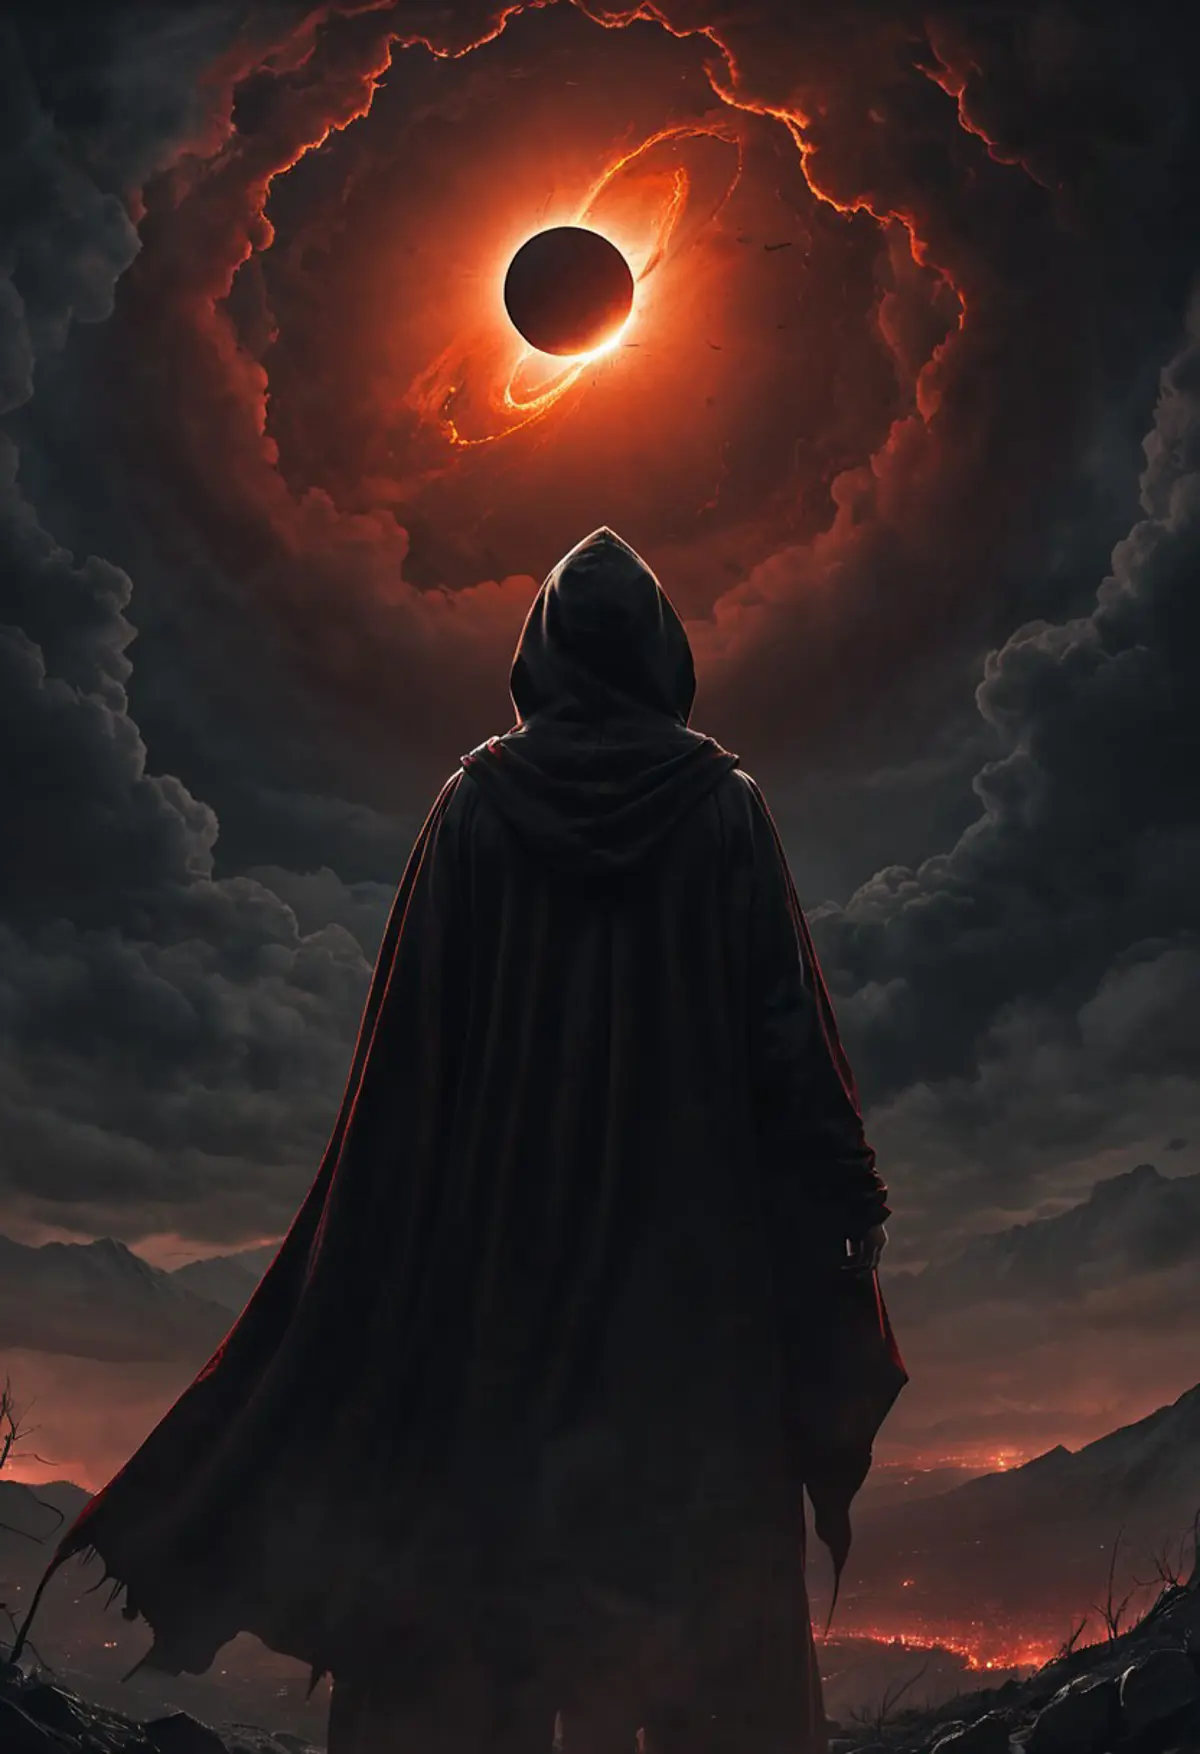 A cloaked figure standing with their back to the viewer, gazing at a solar eclipse. The sky is a dramatic blend of dark clouds and crimson hues, and the landscape features mountain silhouettes and scattered fires. 